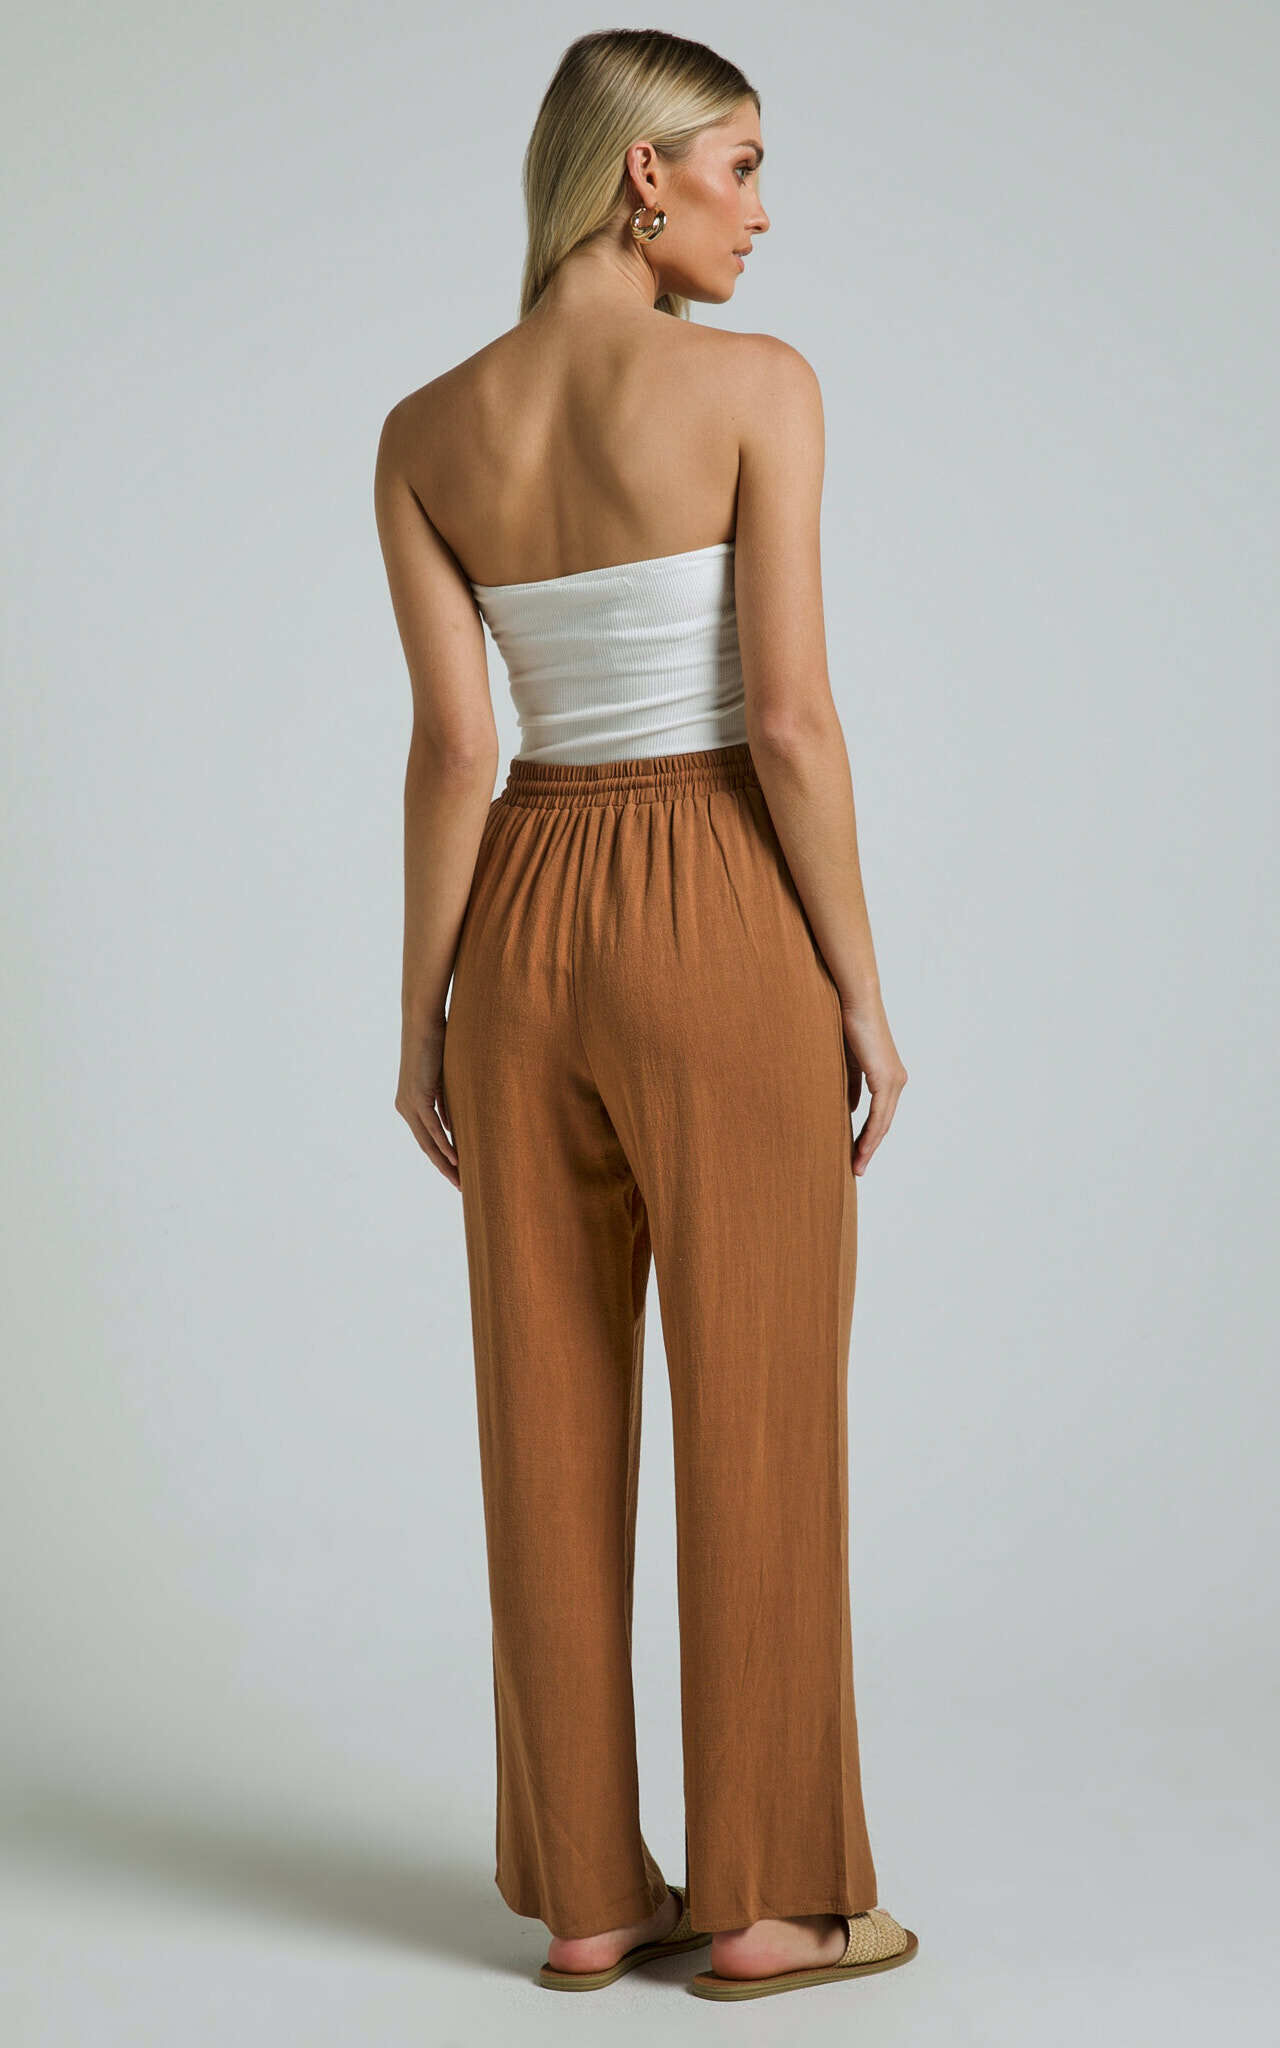 Kala Pants - Mid Waisted Relaxed Elastic Waist Pants in Tobacco